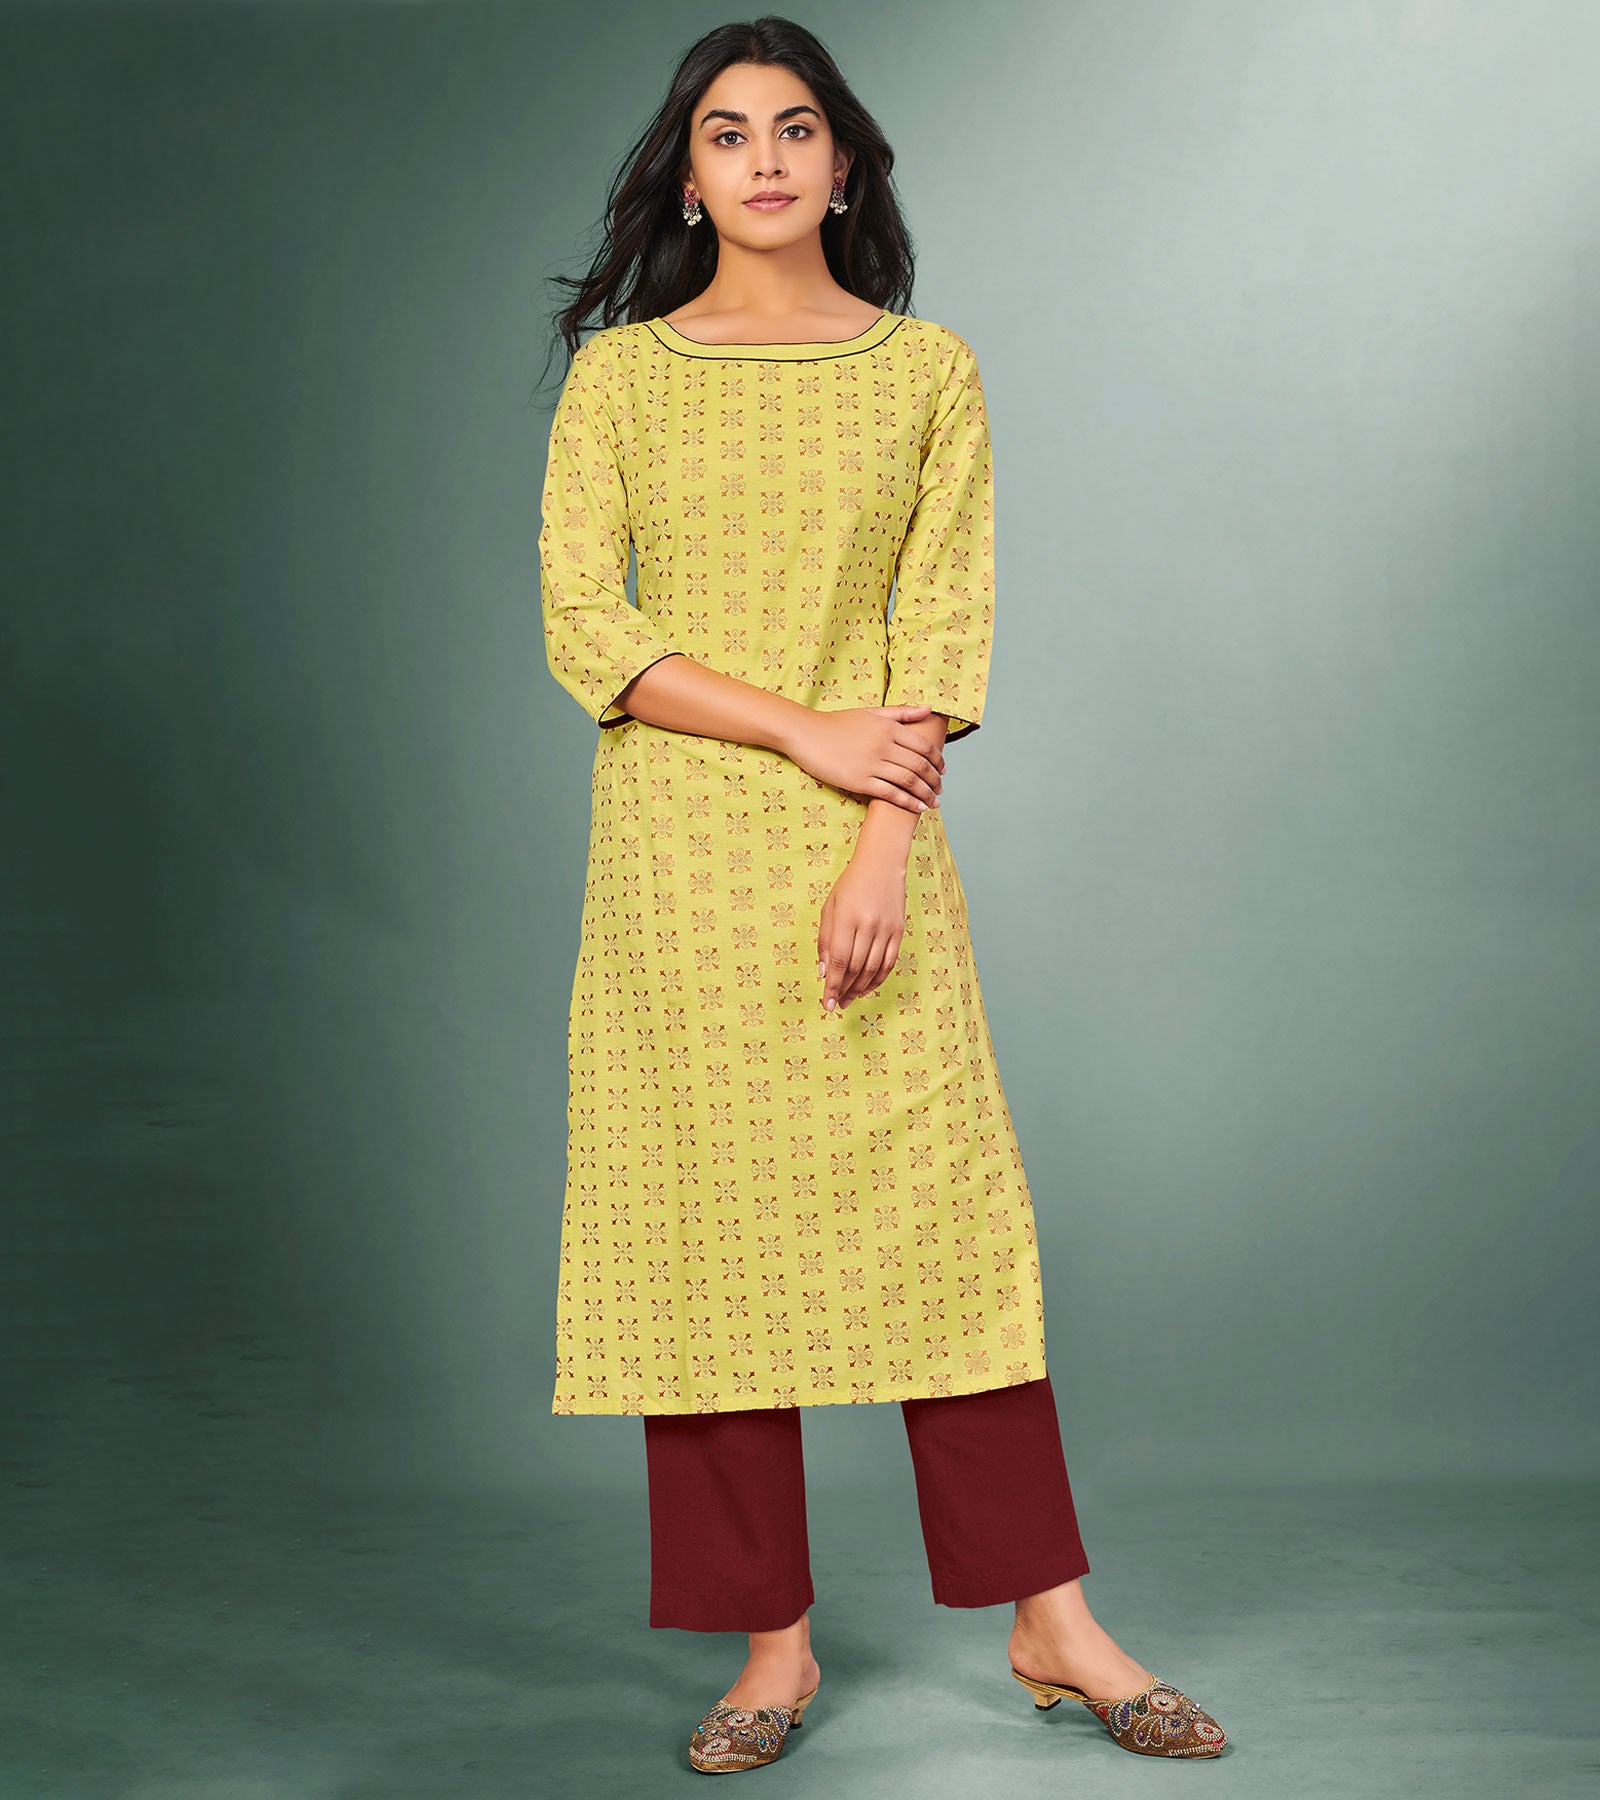 Buy Kurti with Plazo Yellow and Black at Amazon.in